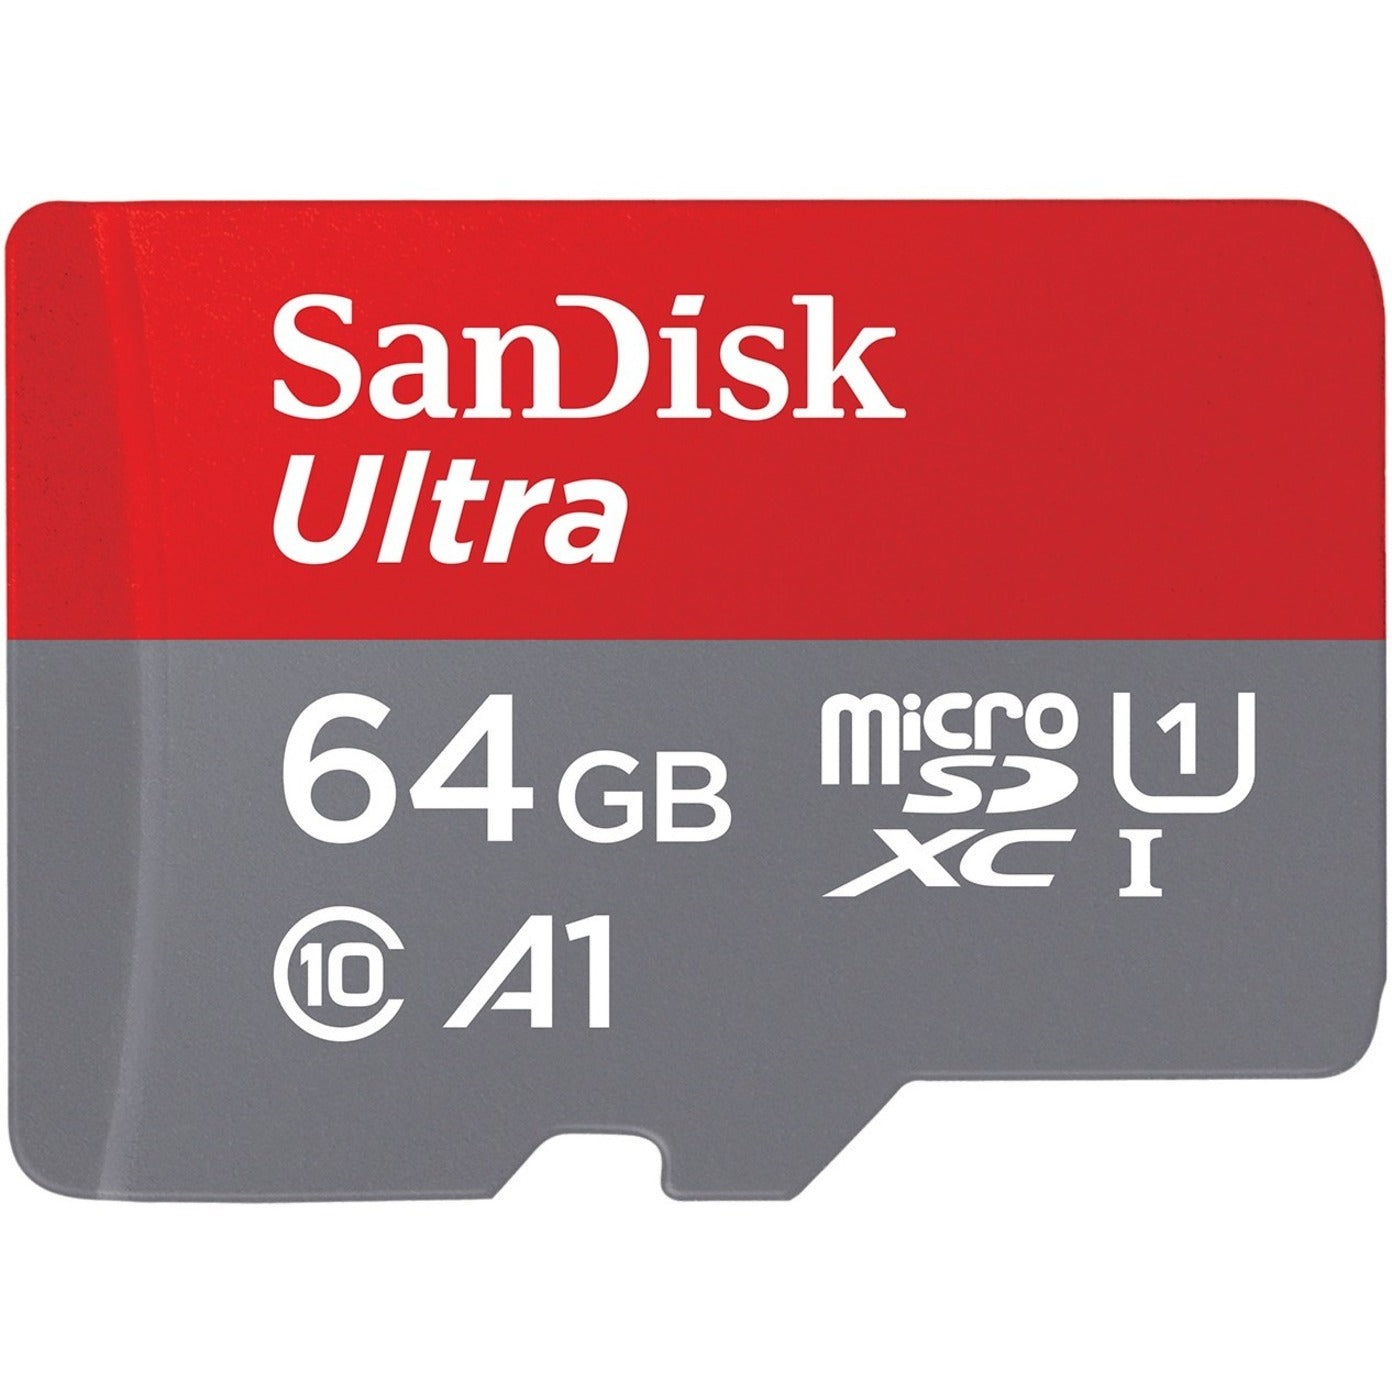 SanDisk SDSQUA4-064G-AN6MA Ultra microSDXC UHS-I Card with Adapter - 64GB, Class 10, 120 MB/s Data Transfer Rate [Discontinued]